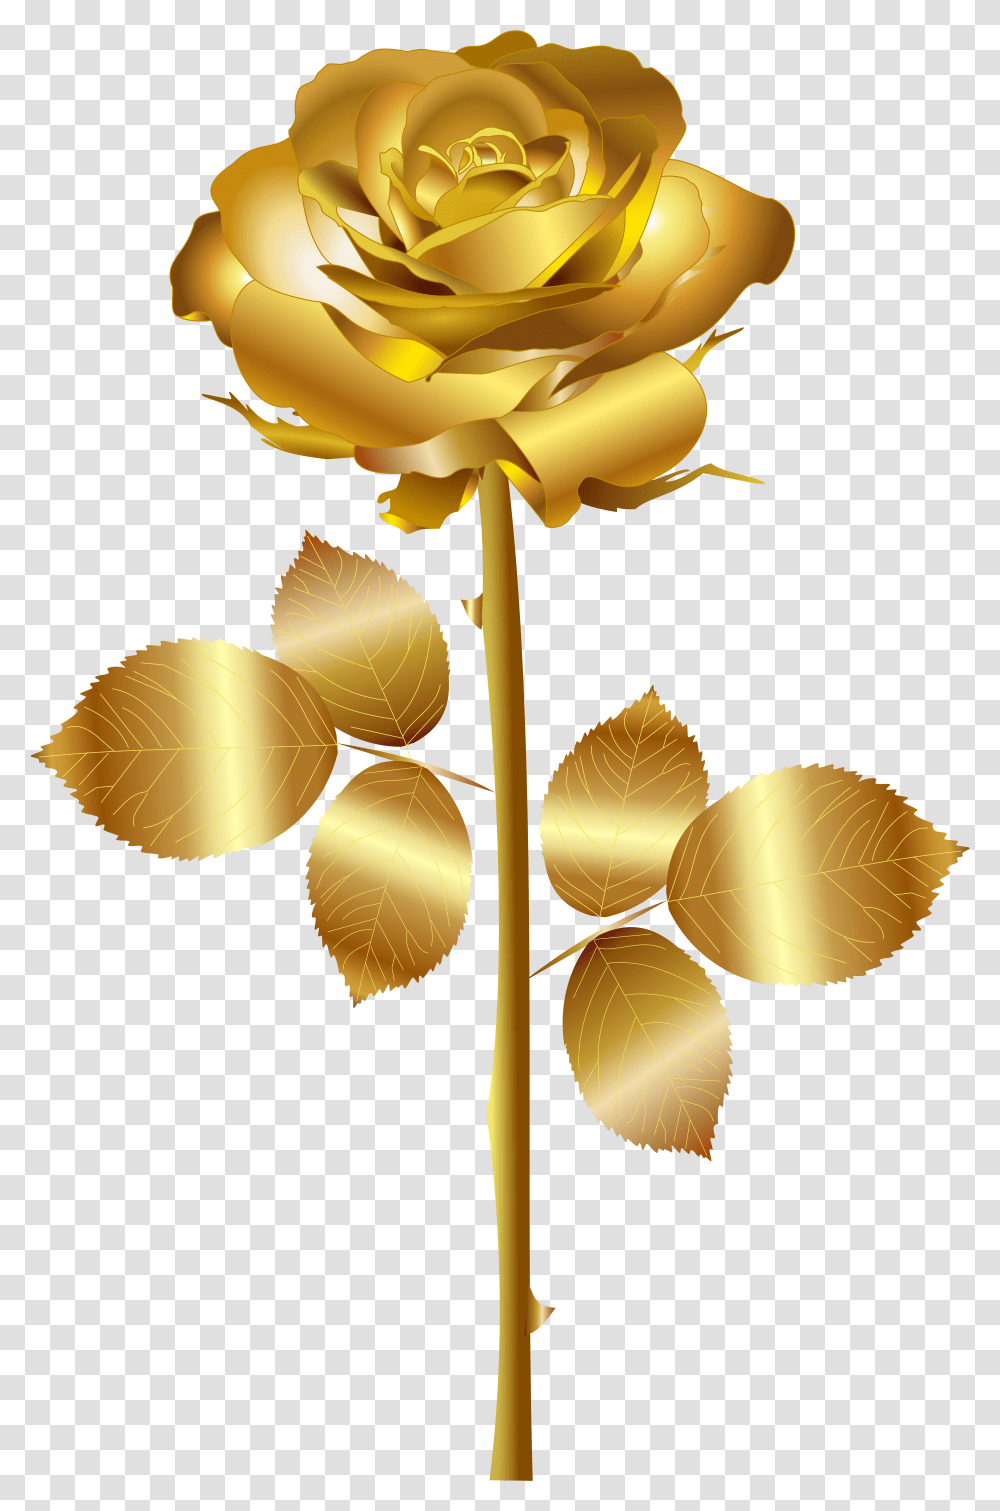 White Rose Clipart Format Free Clip Art Stock Gold Rose Flower Transparent Png